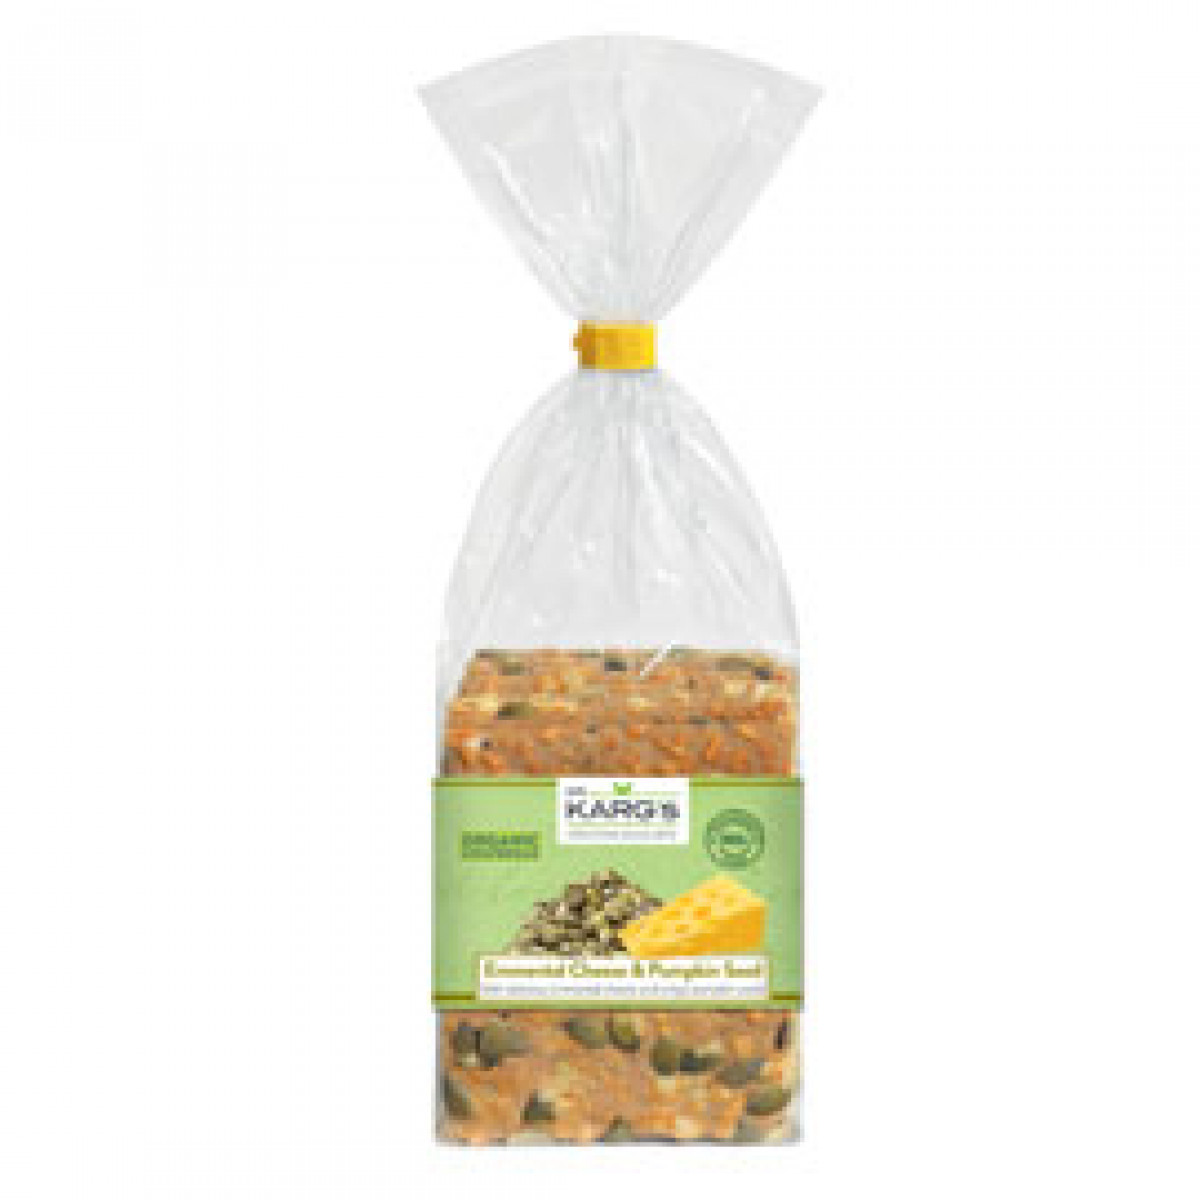 Product picture for Emmental Cheese/Pumpkin Seed Crispbread